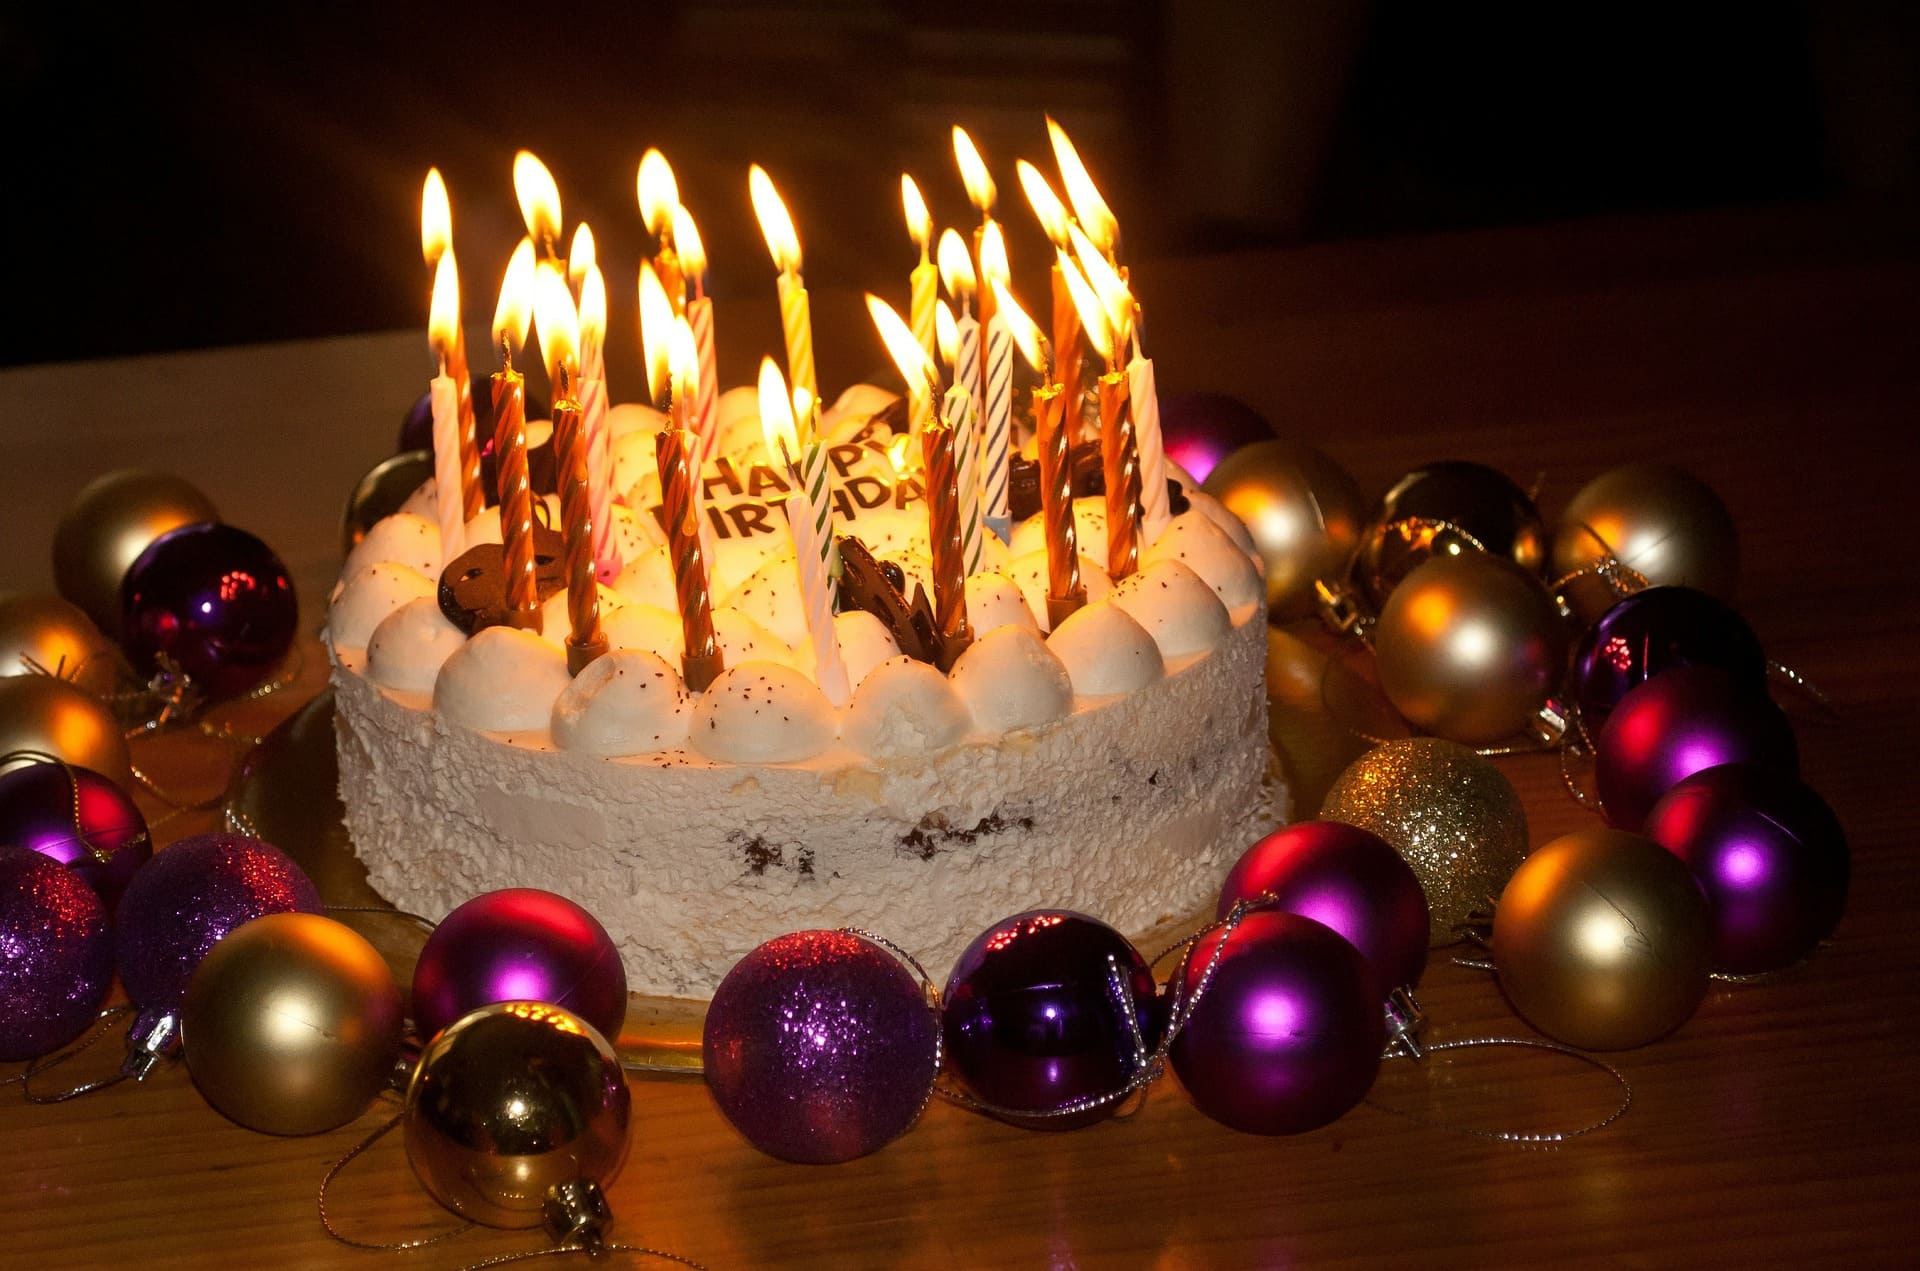 Birthday cake with candles | Source: Pixabay